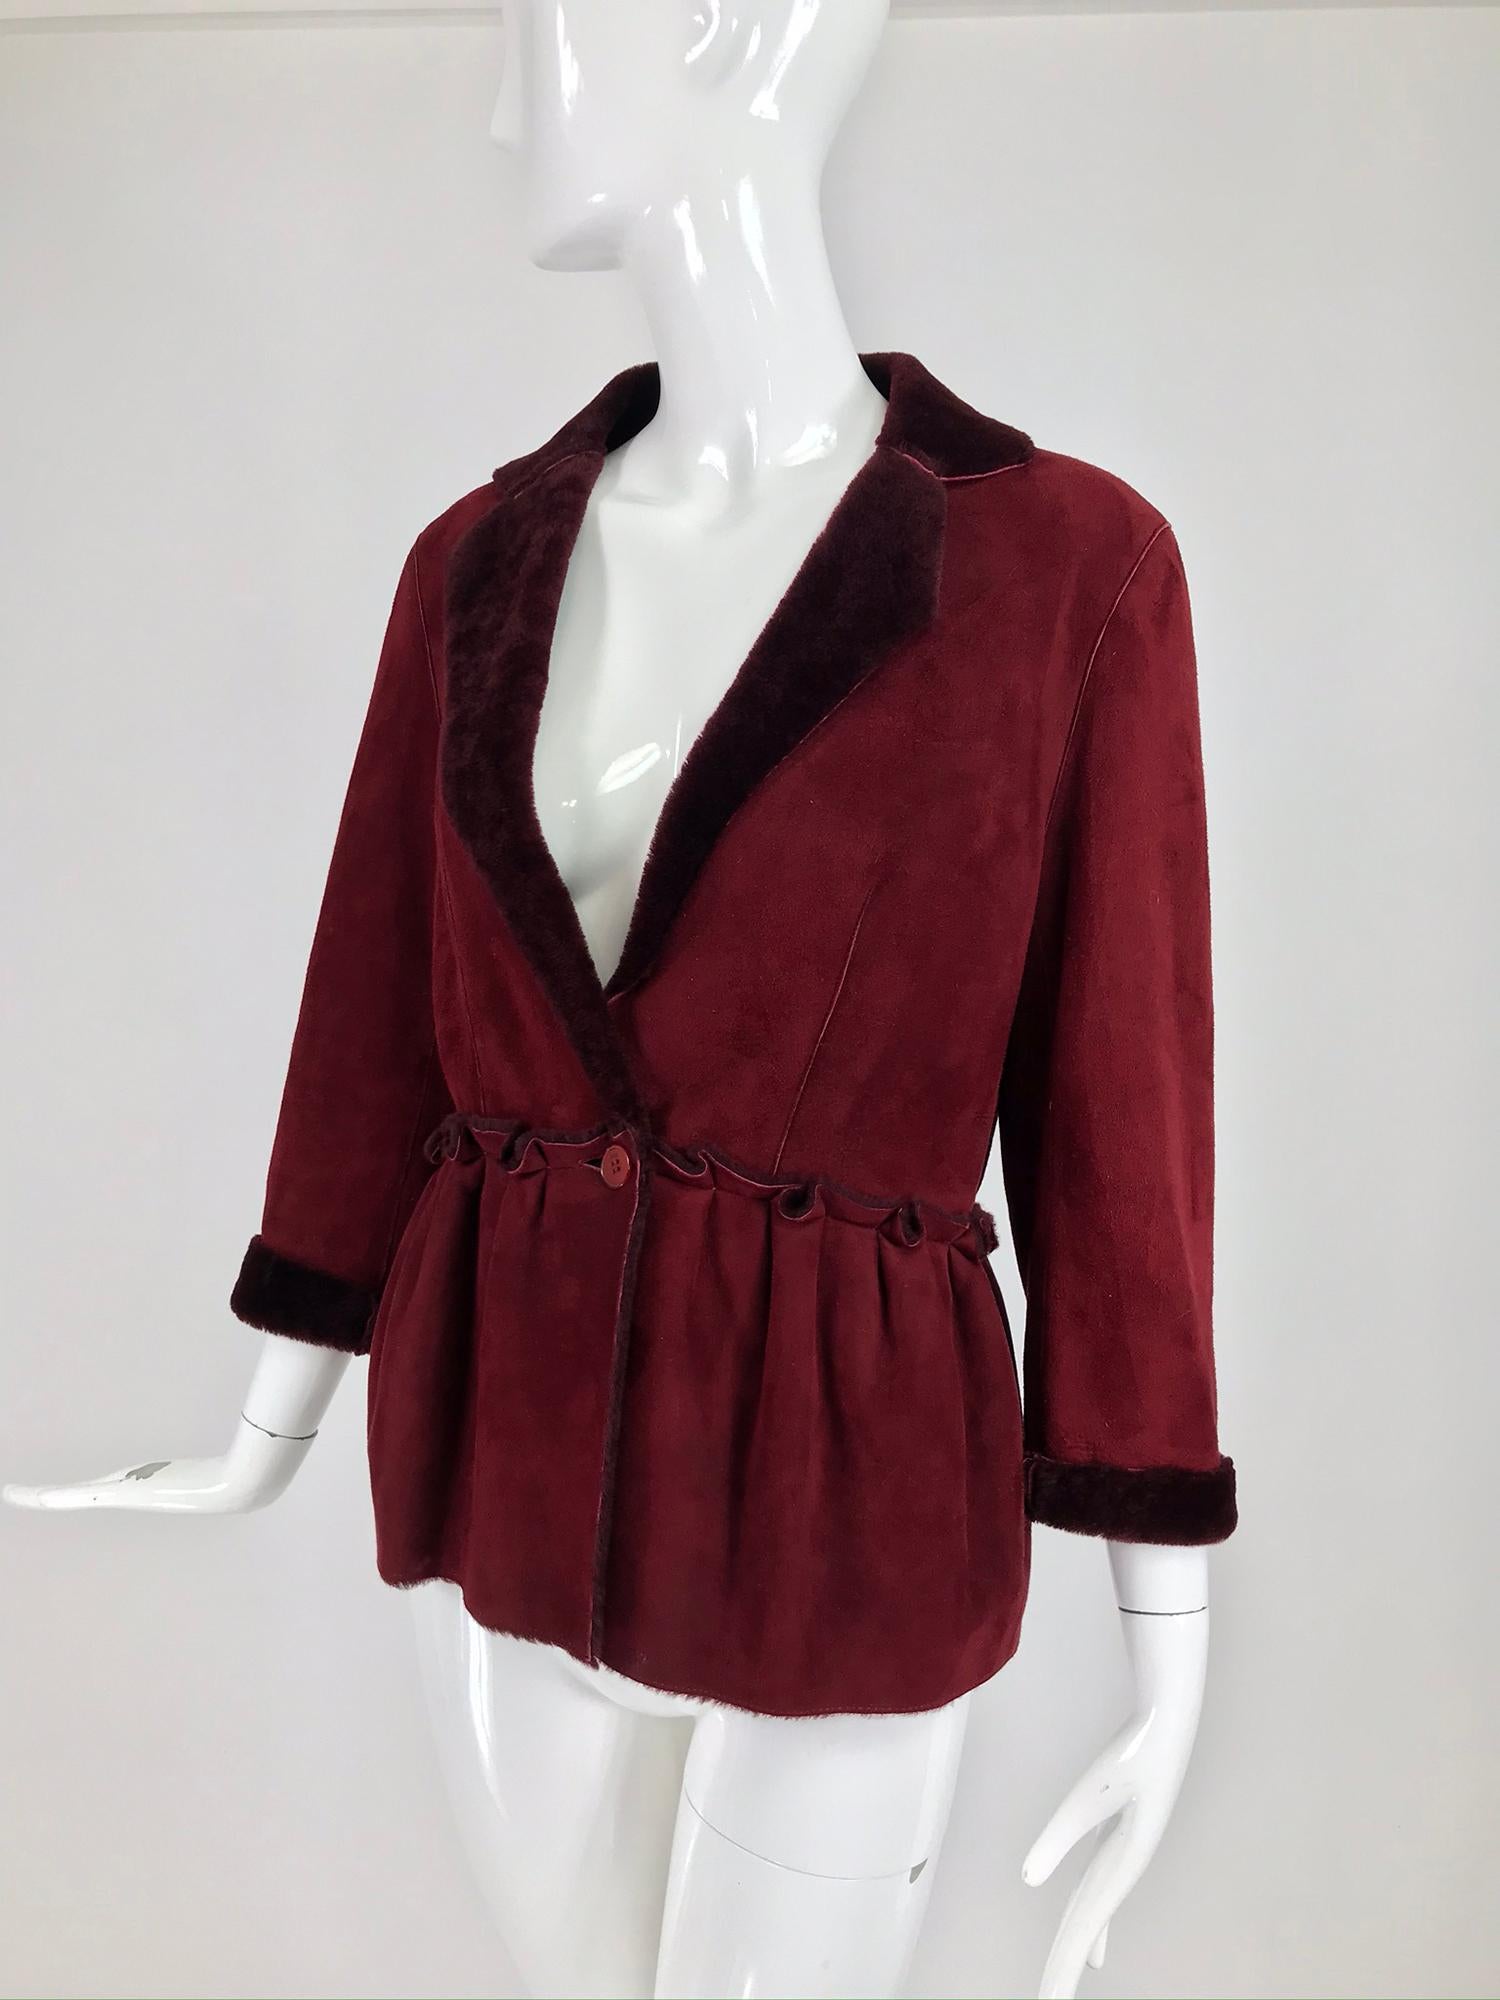 Fendi burgundy shearling button front jacket. Rich burgundy shearling is light and warm, this style could be worn as a layering piece. The jacket closes at the seamed waist front with a single button closure. The jacket  has notched lapels and a